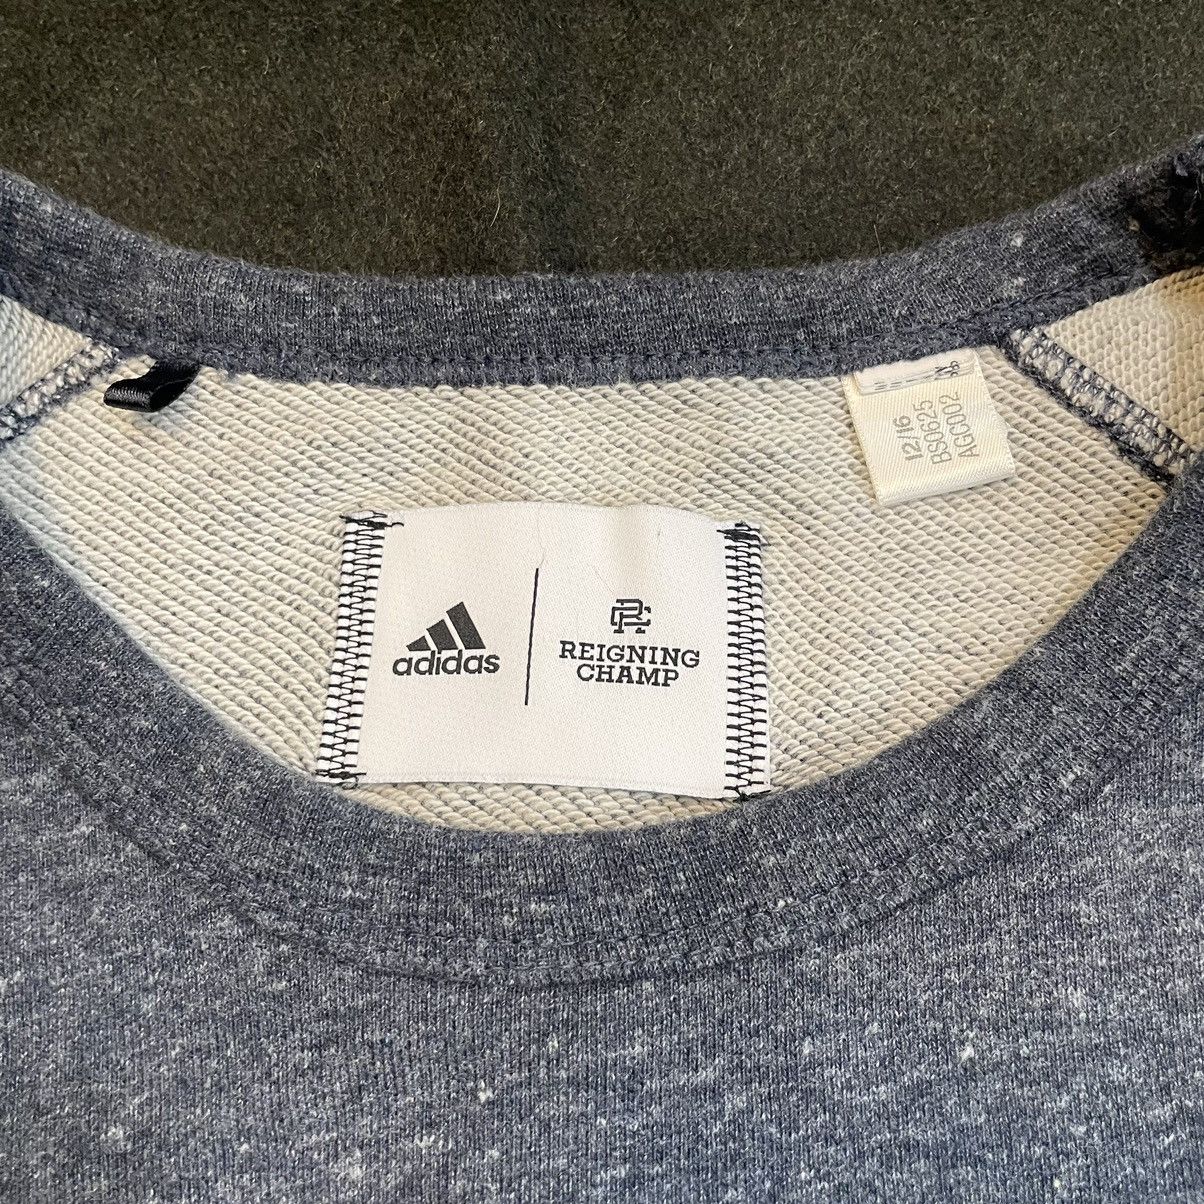 Adidas ADIDAS X REIGNING CHAMP French Terry Crew Neck small | Grailed